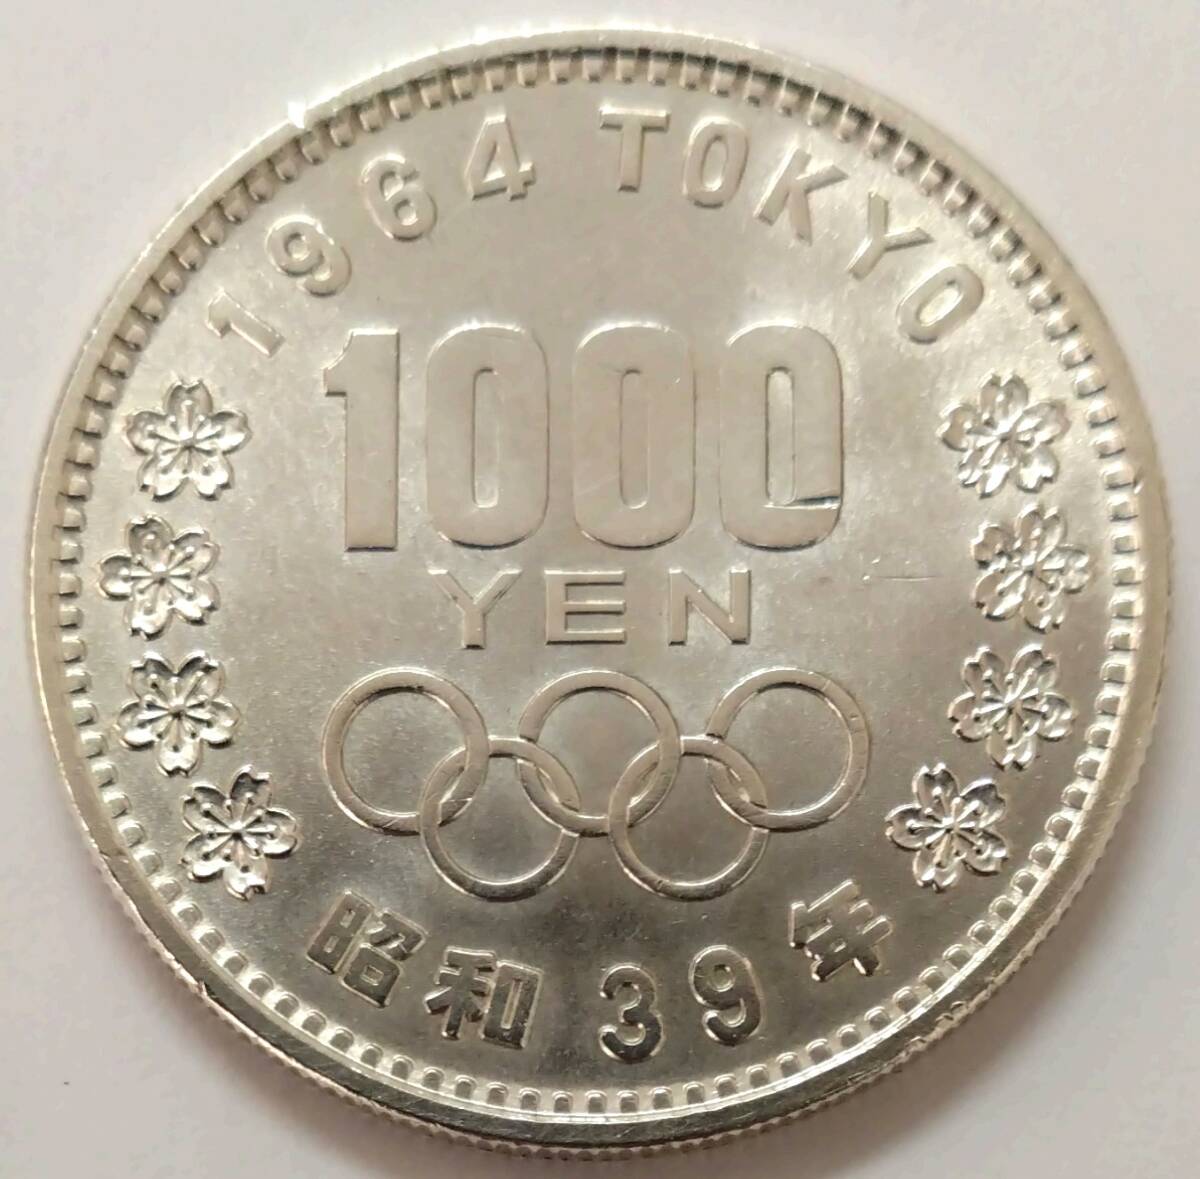 * 1964 year Showa era 39 year Tokyo Olympic memory 1000 jpy silver coin commemorative coin thousand jpy silver coin 3 sheets *